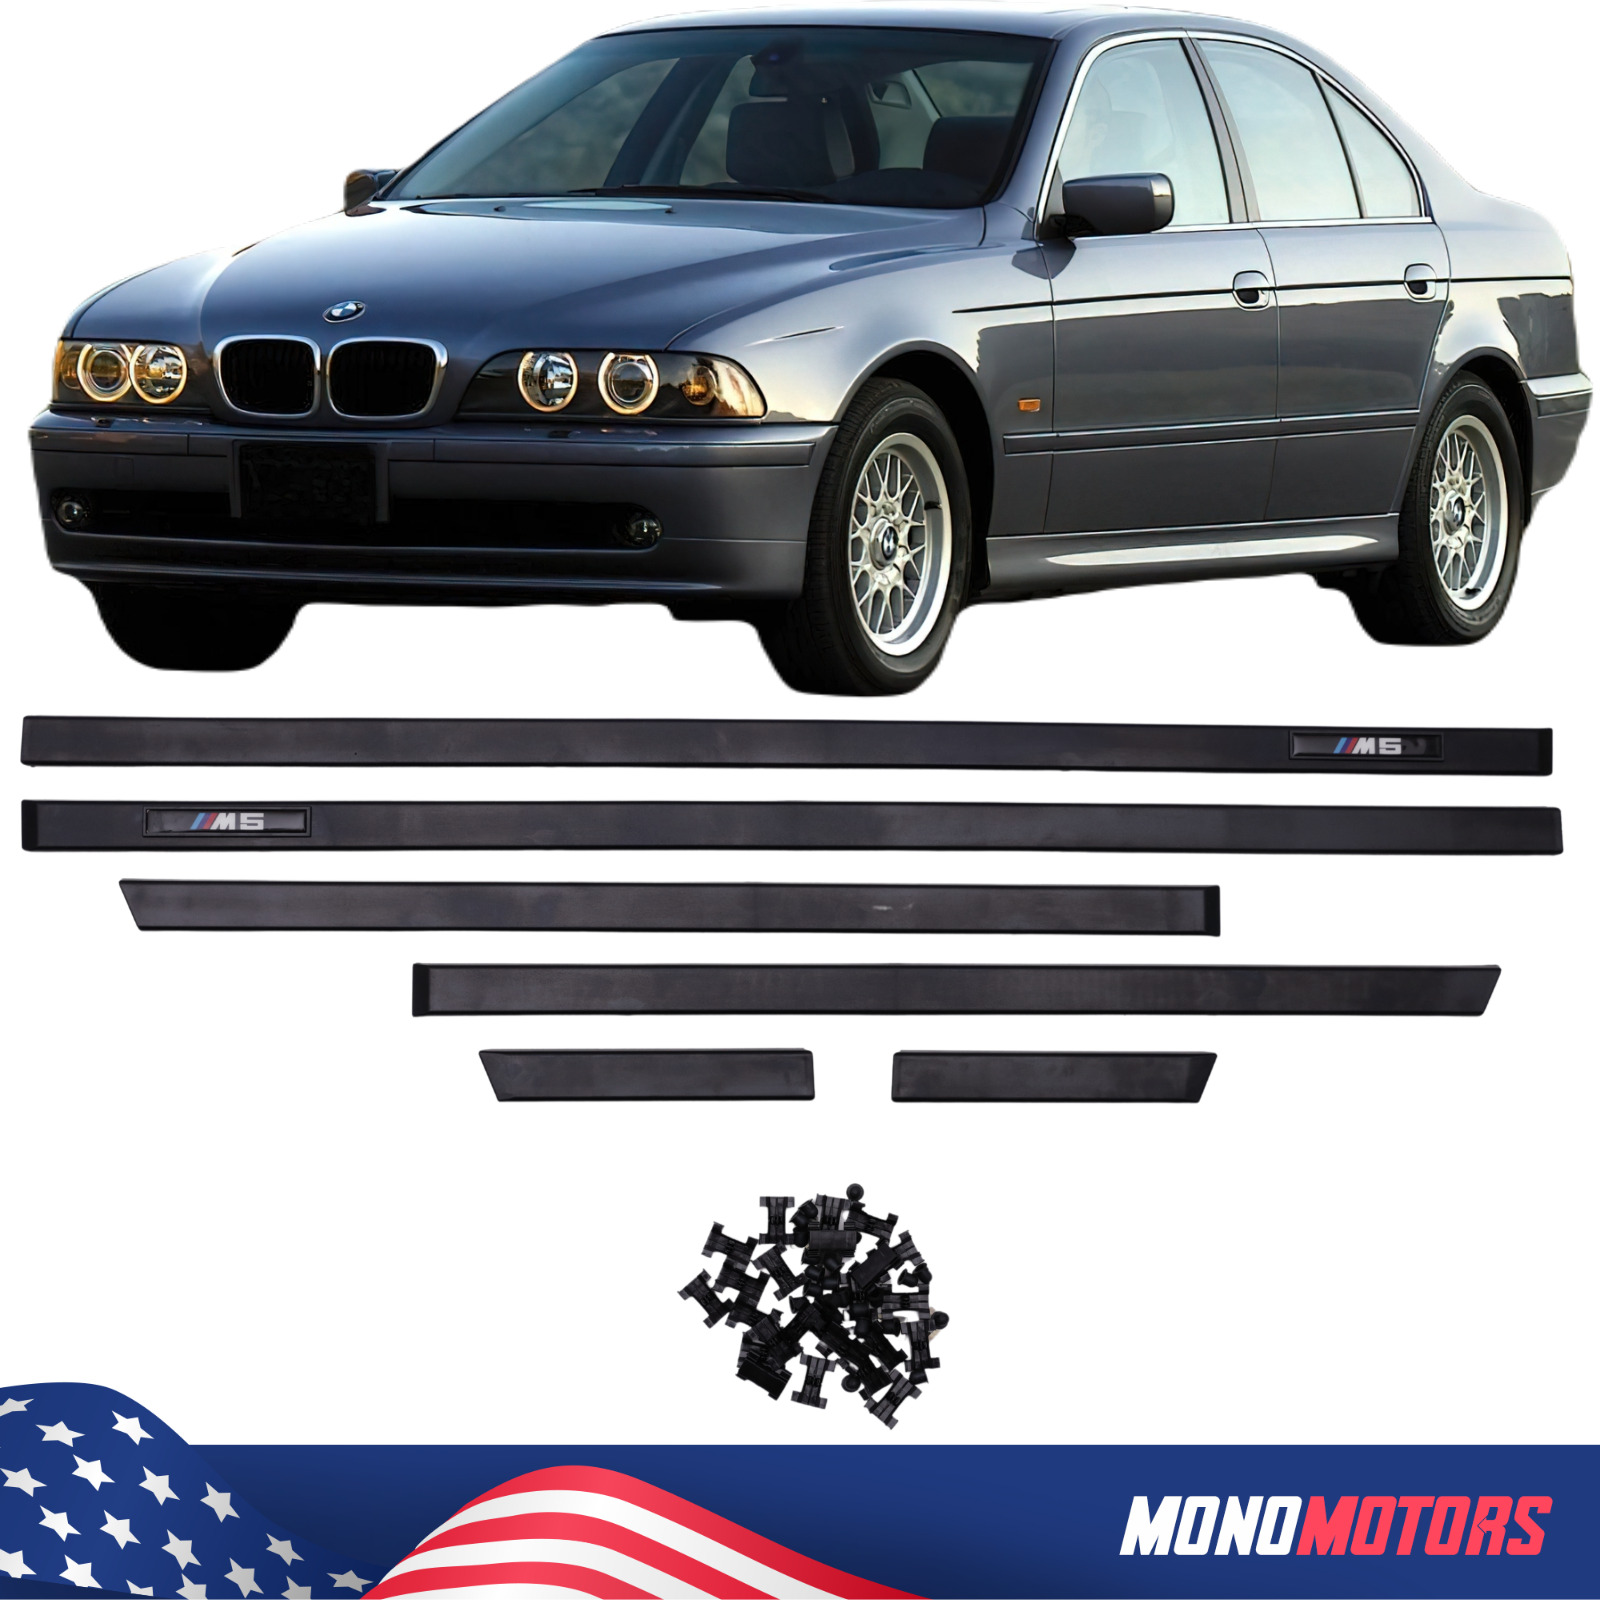 BODY SIDE MOULDING TRIM For BMW E39 M5 STYLE 5 SERIES SEDAN FREE FAST SHIPPING